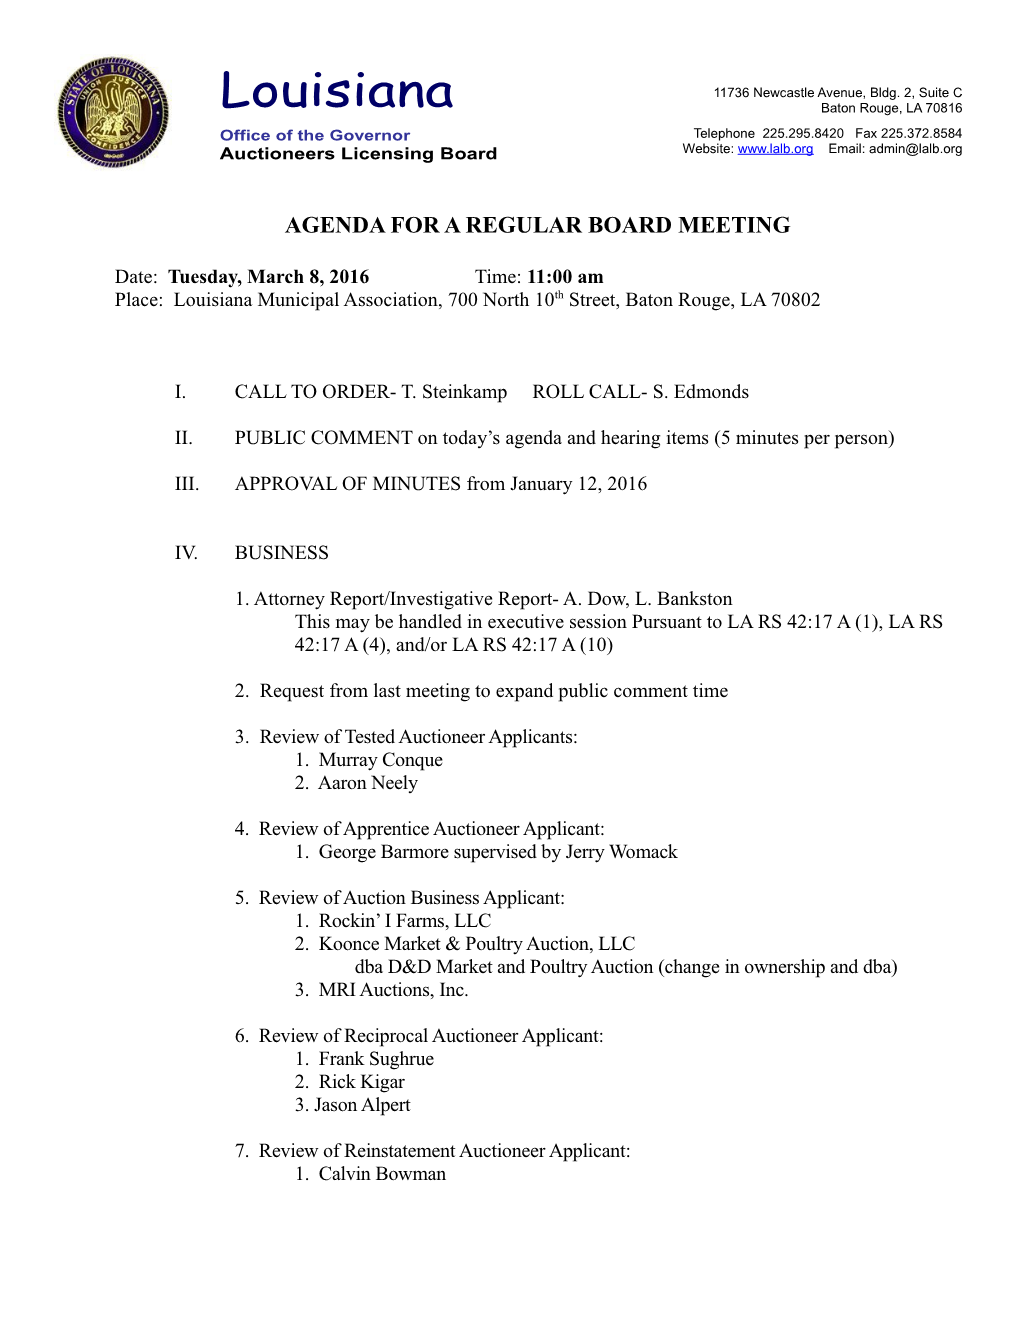 Agenda for a Regularboard Meeting